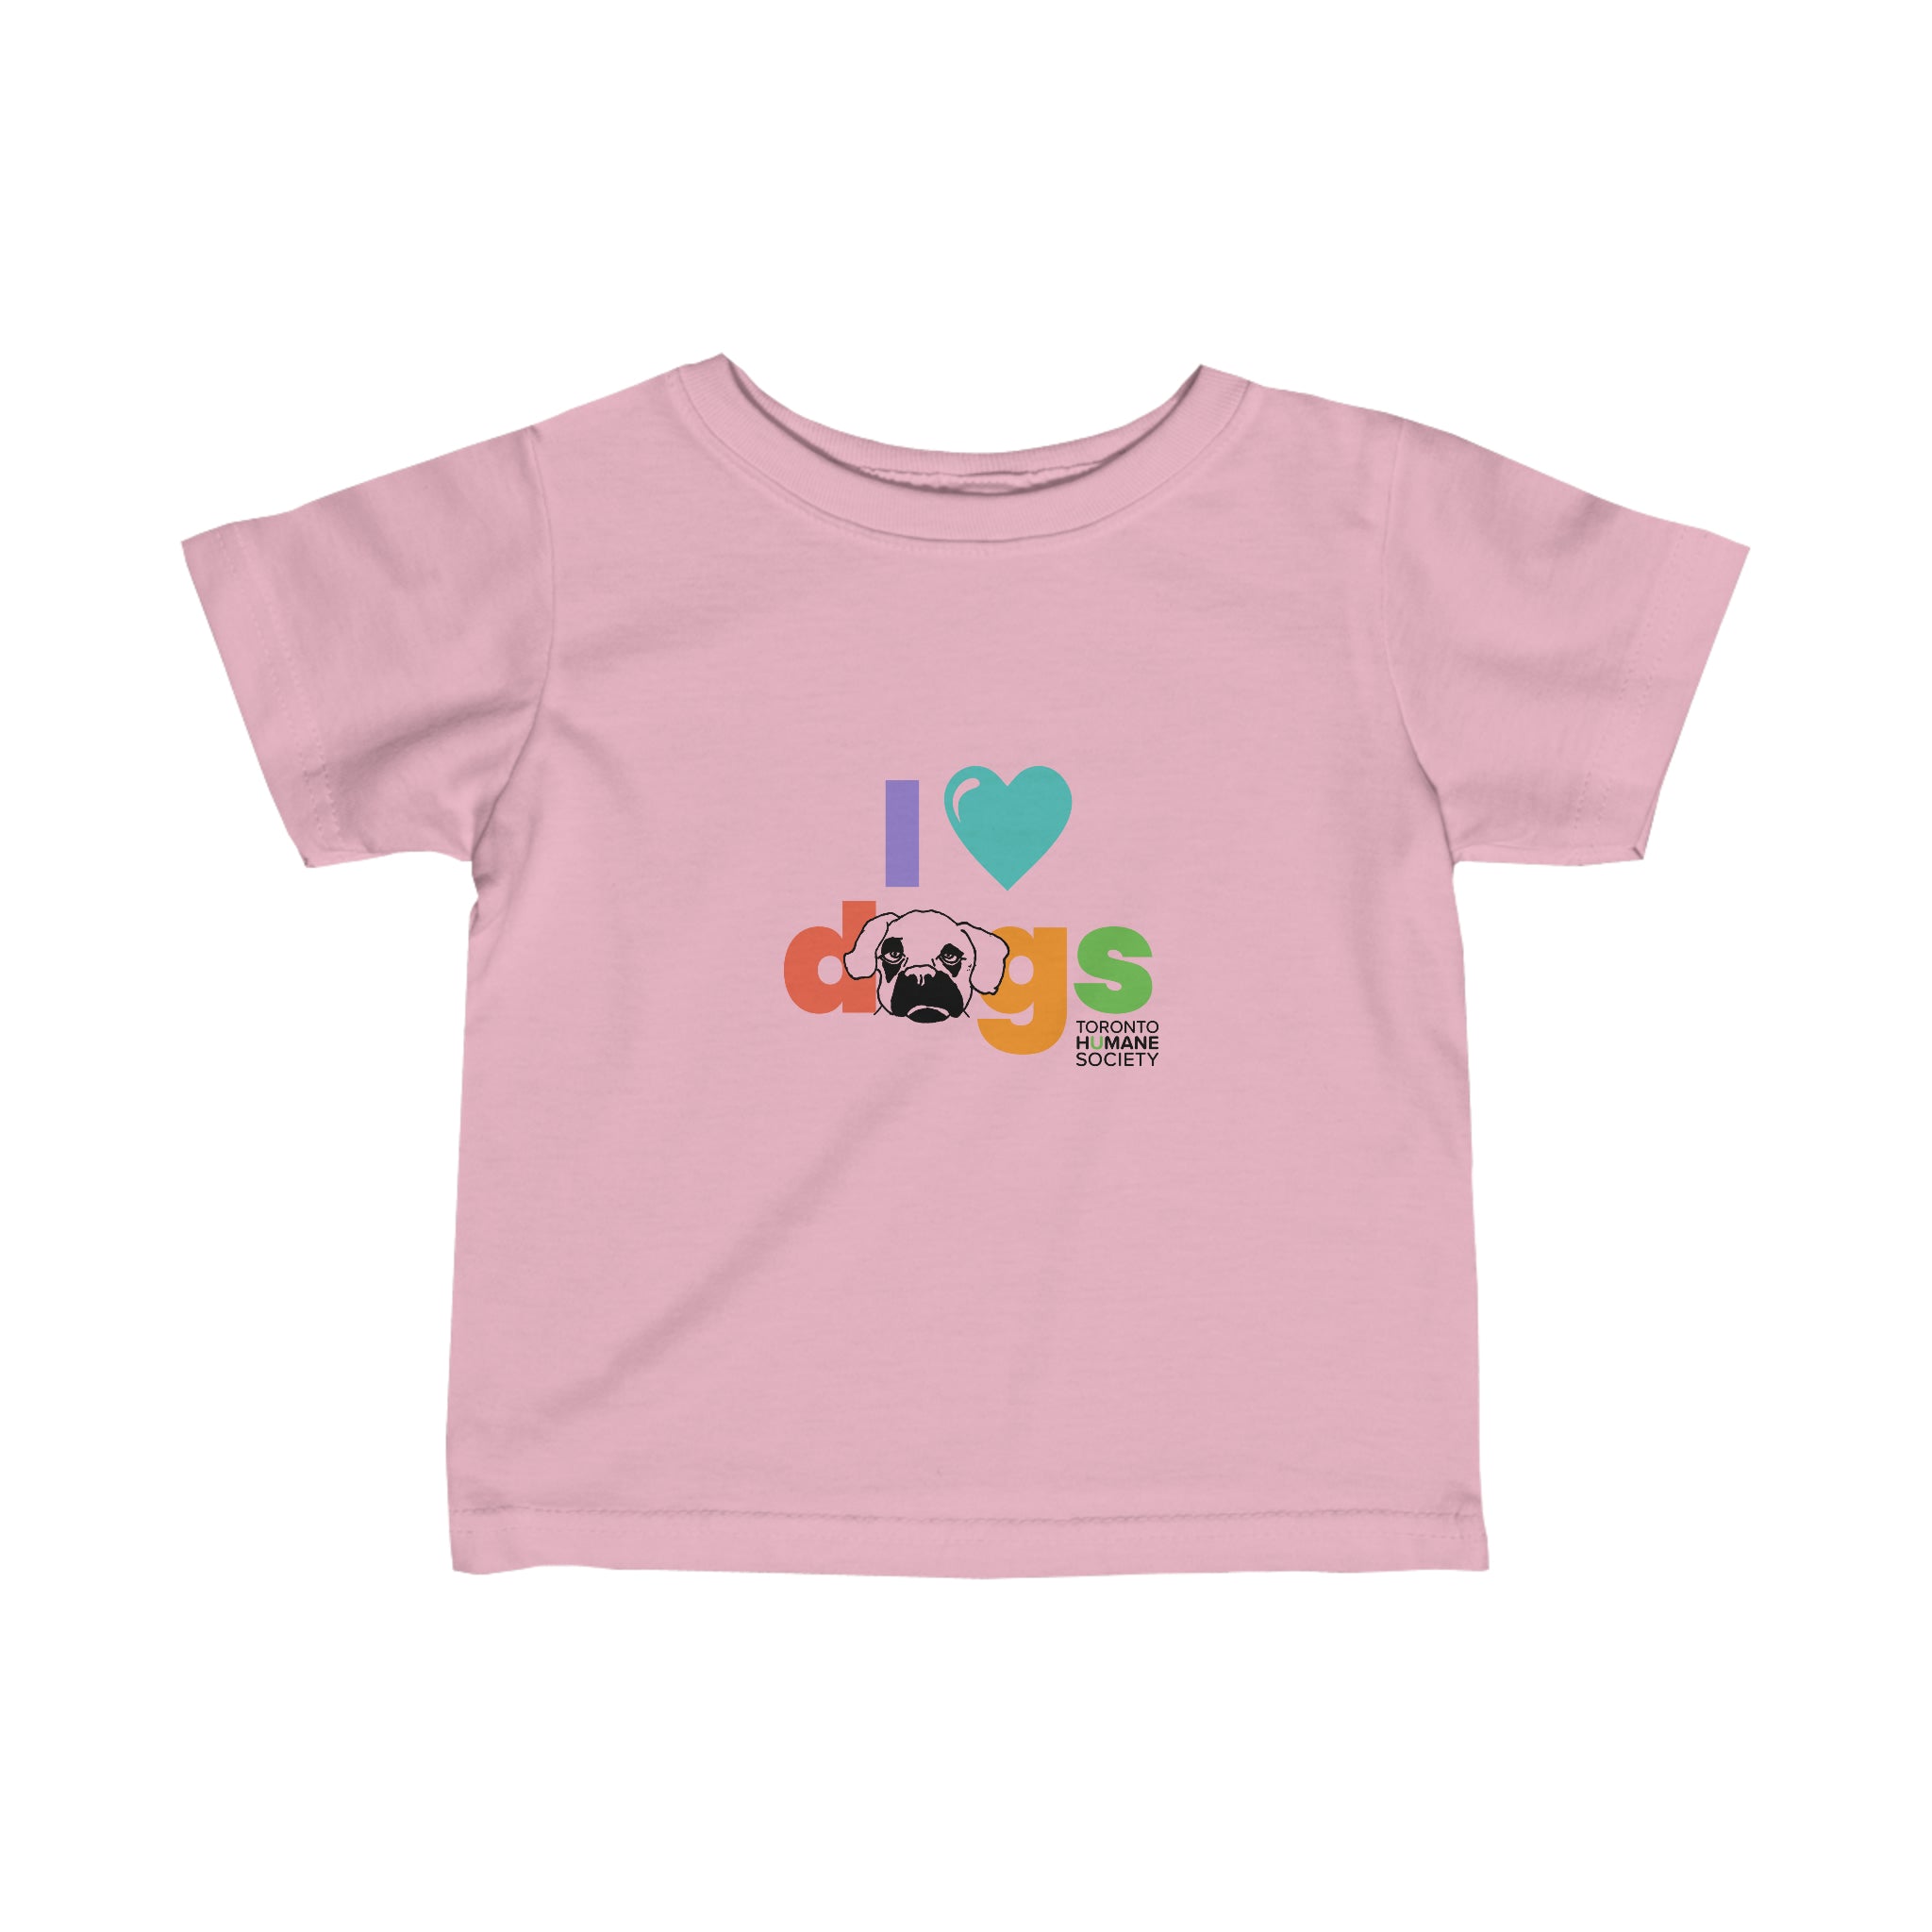 Infant Fine Jersey Tee - I Love Dogs